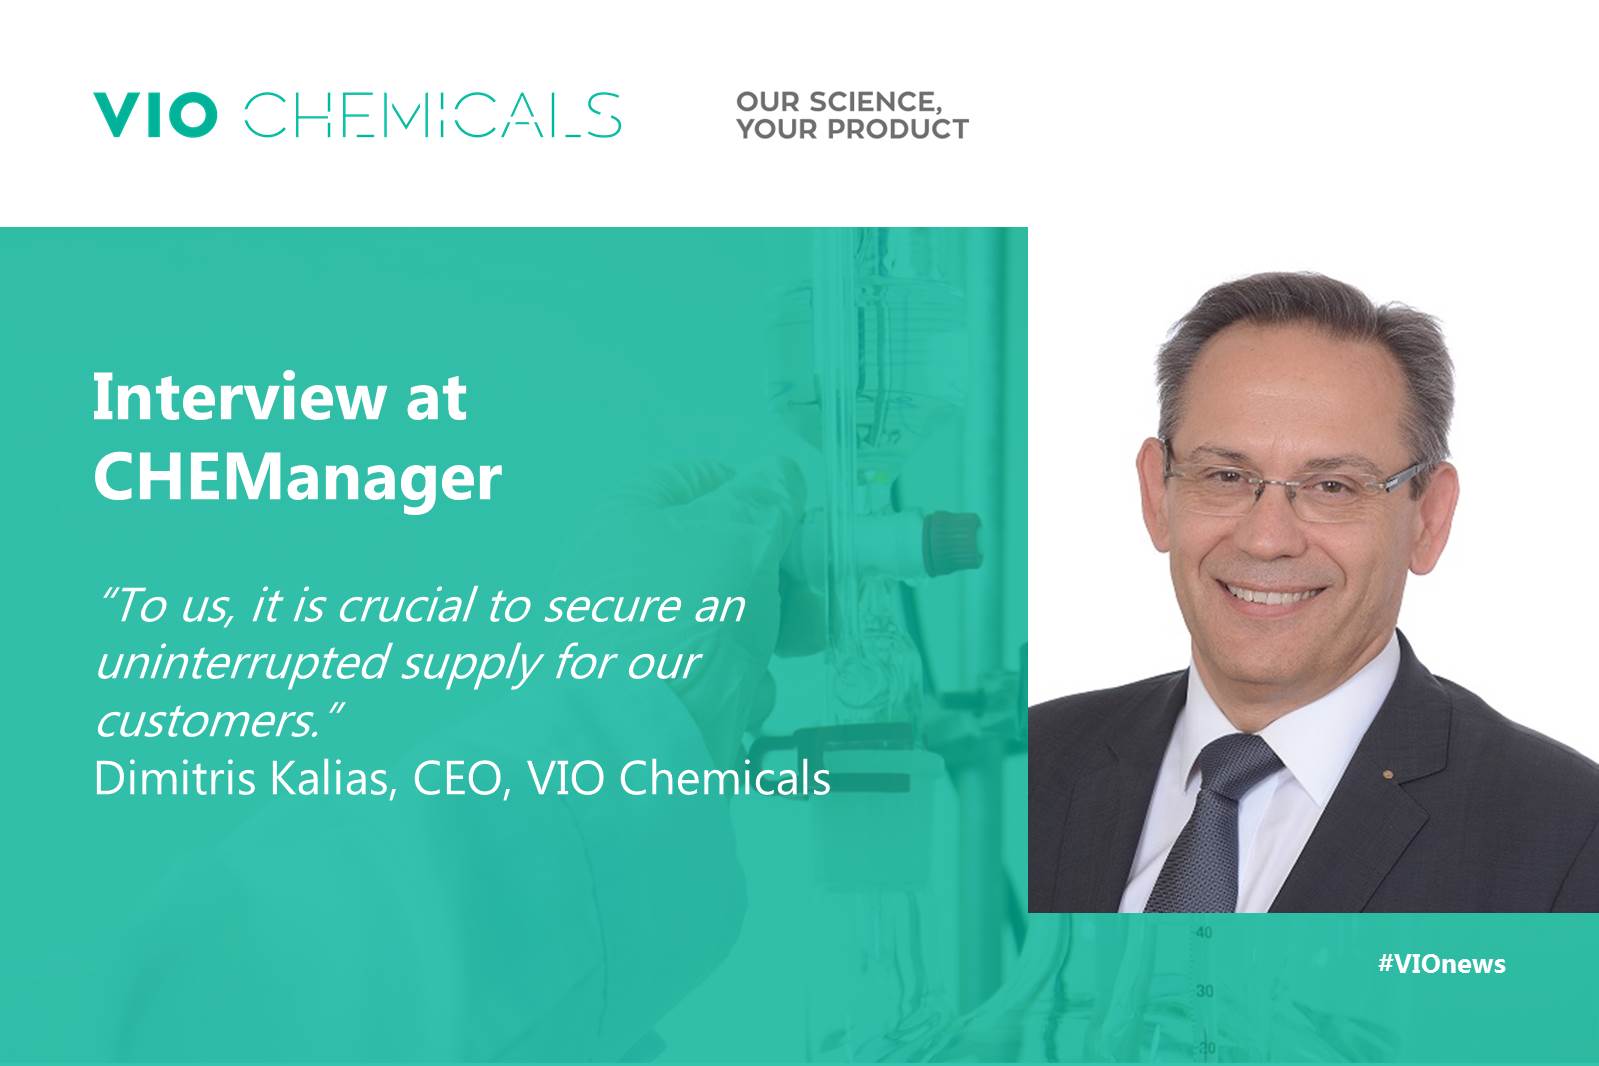 Dr. Kalias interview at CHEManager